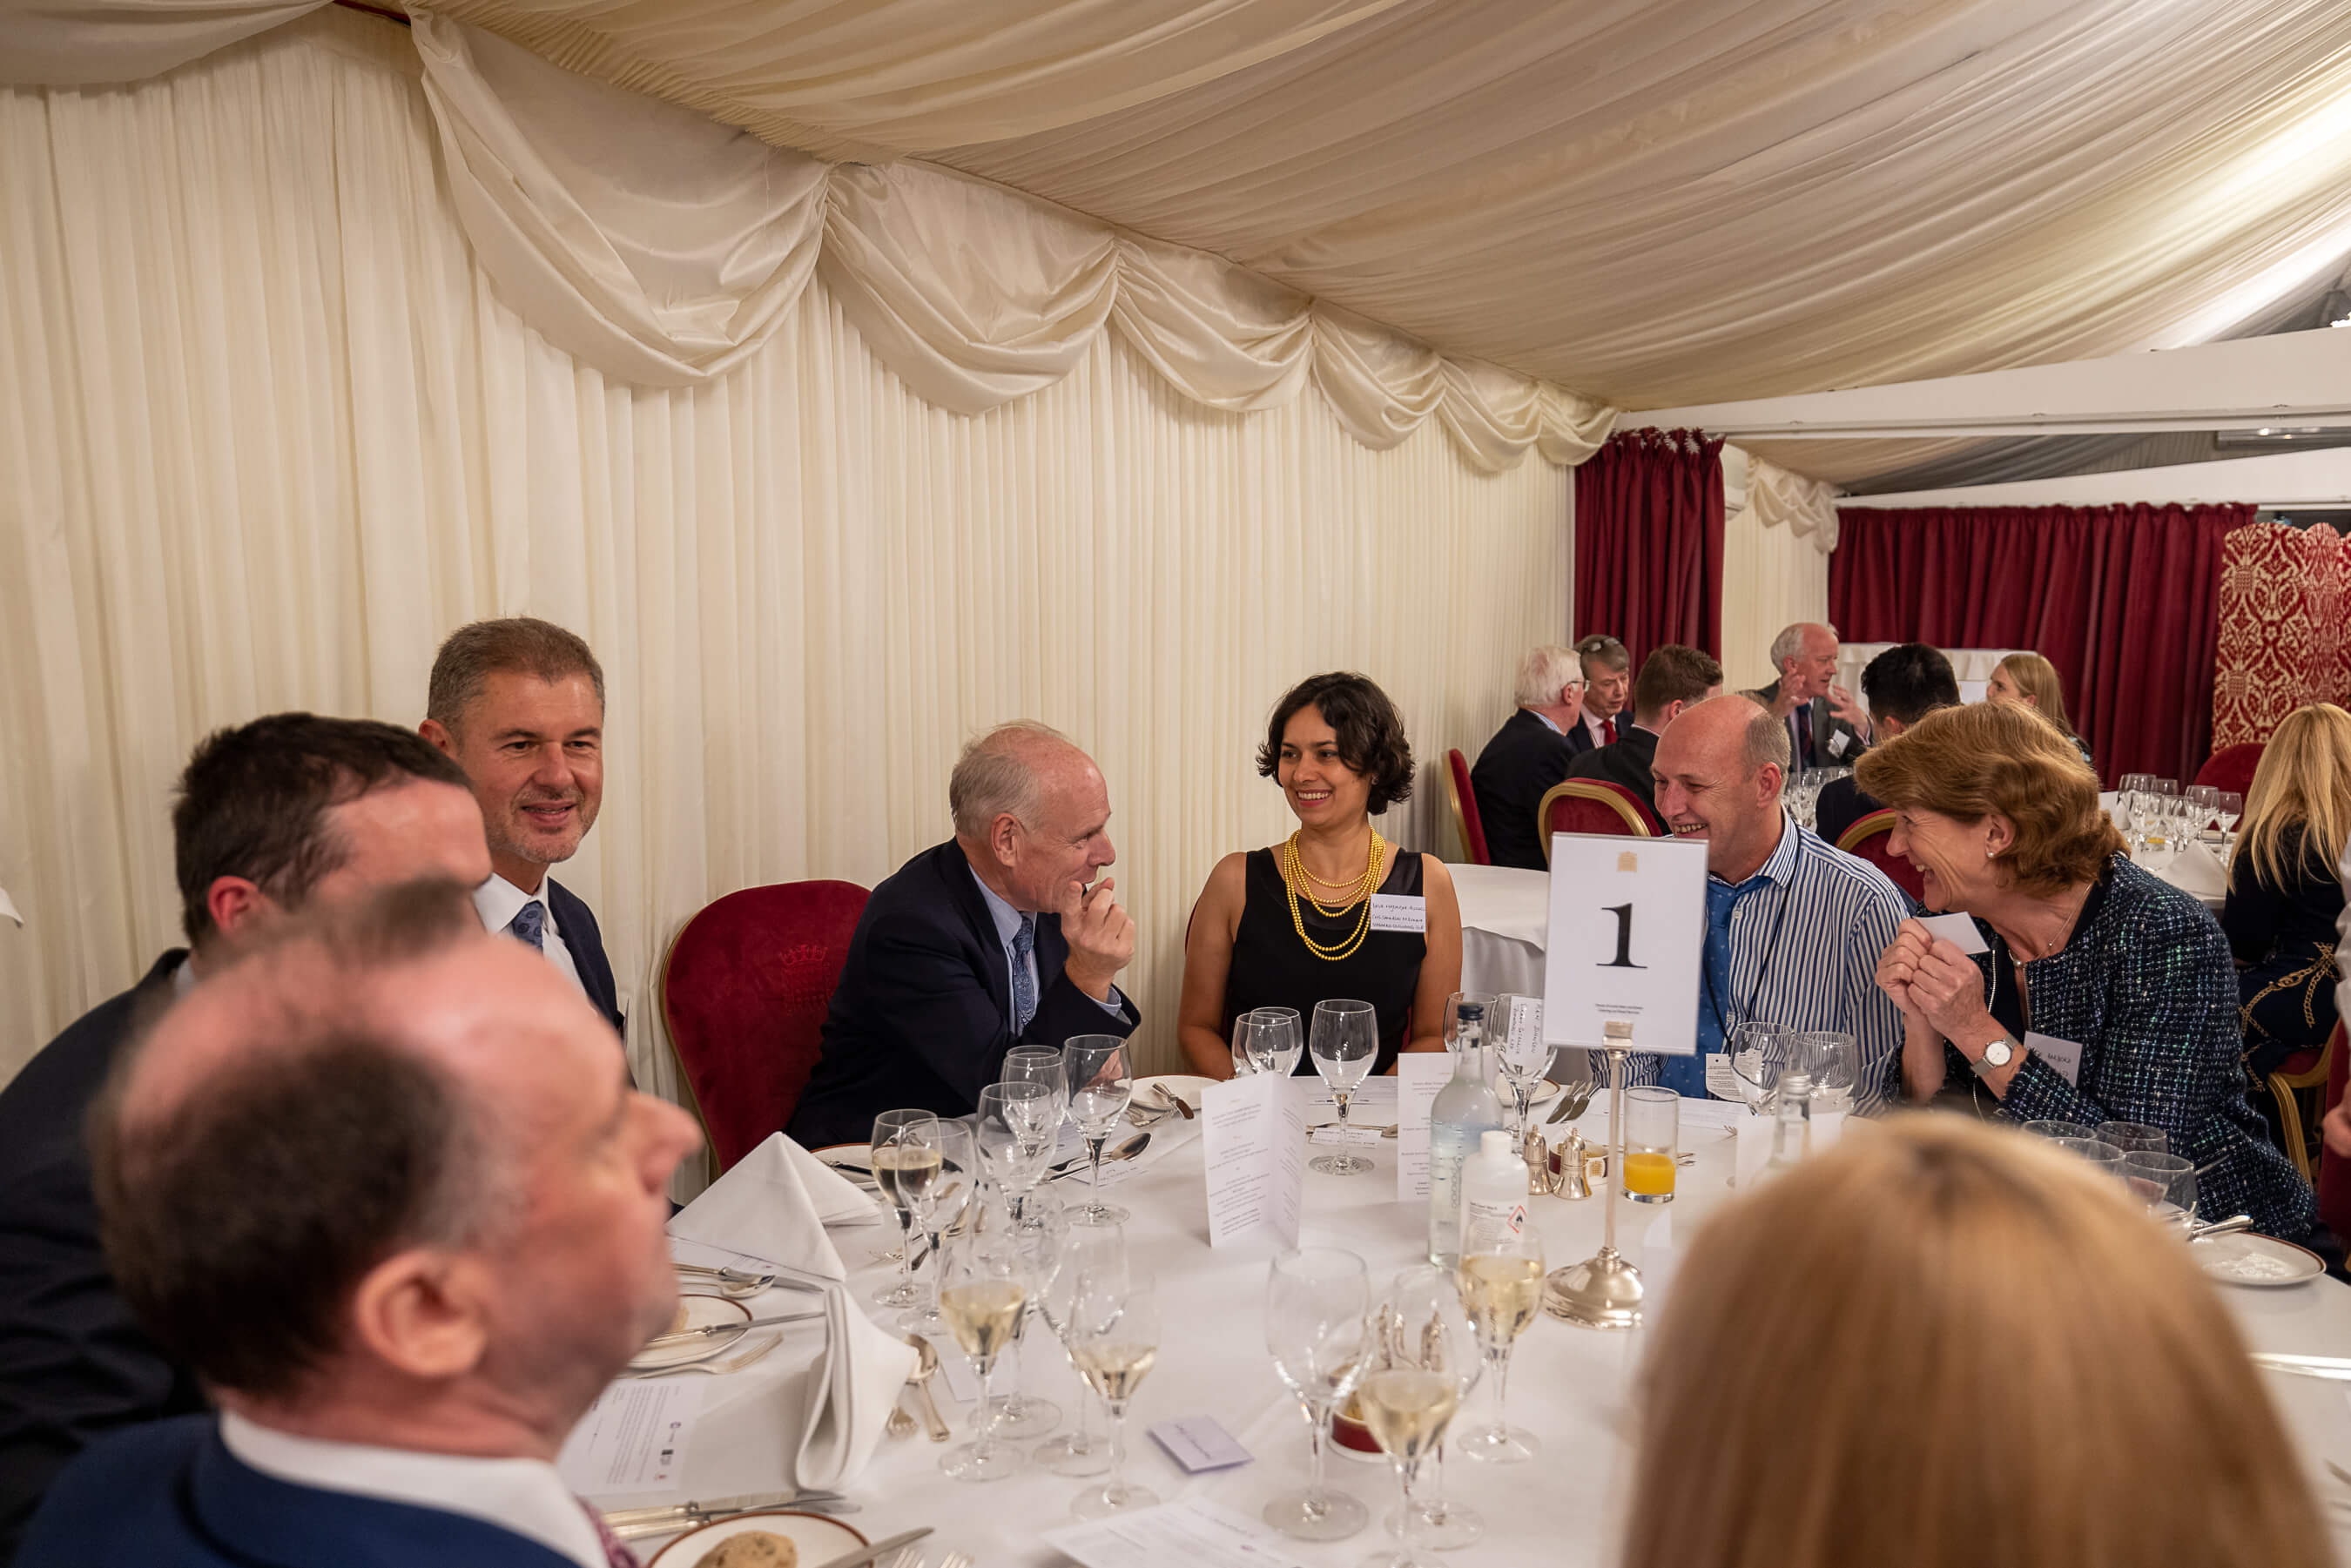 House of Lords Annual Dinner with Lord Callanan, Minister of State for Business Energy & Industrial Strategy